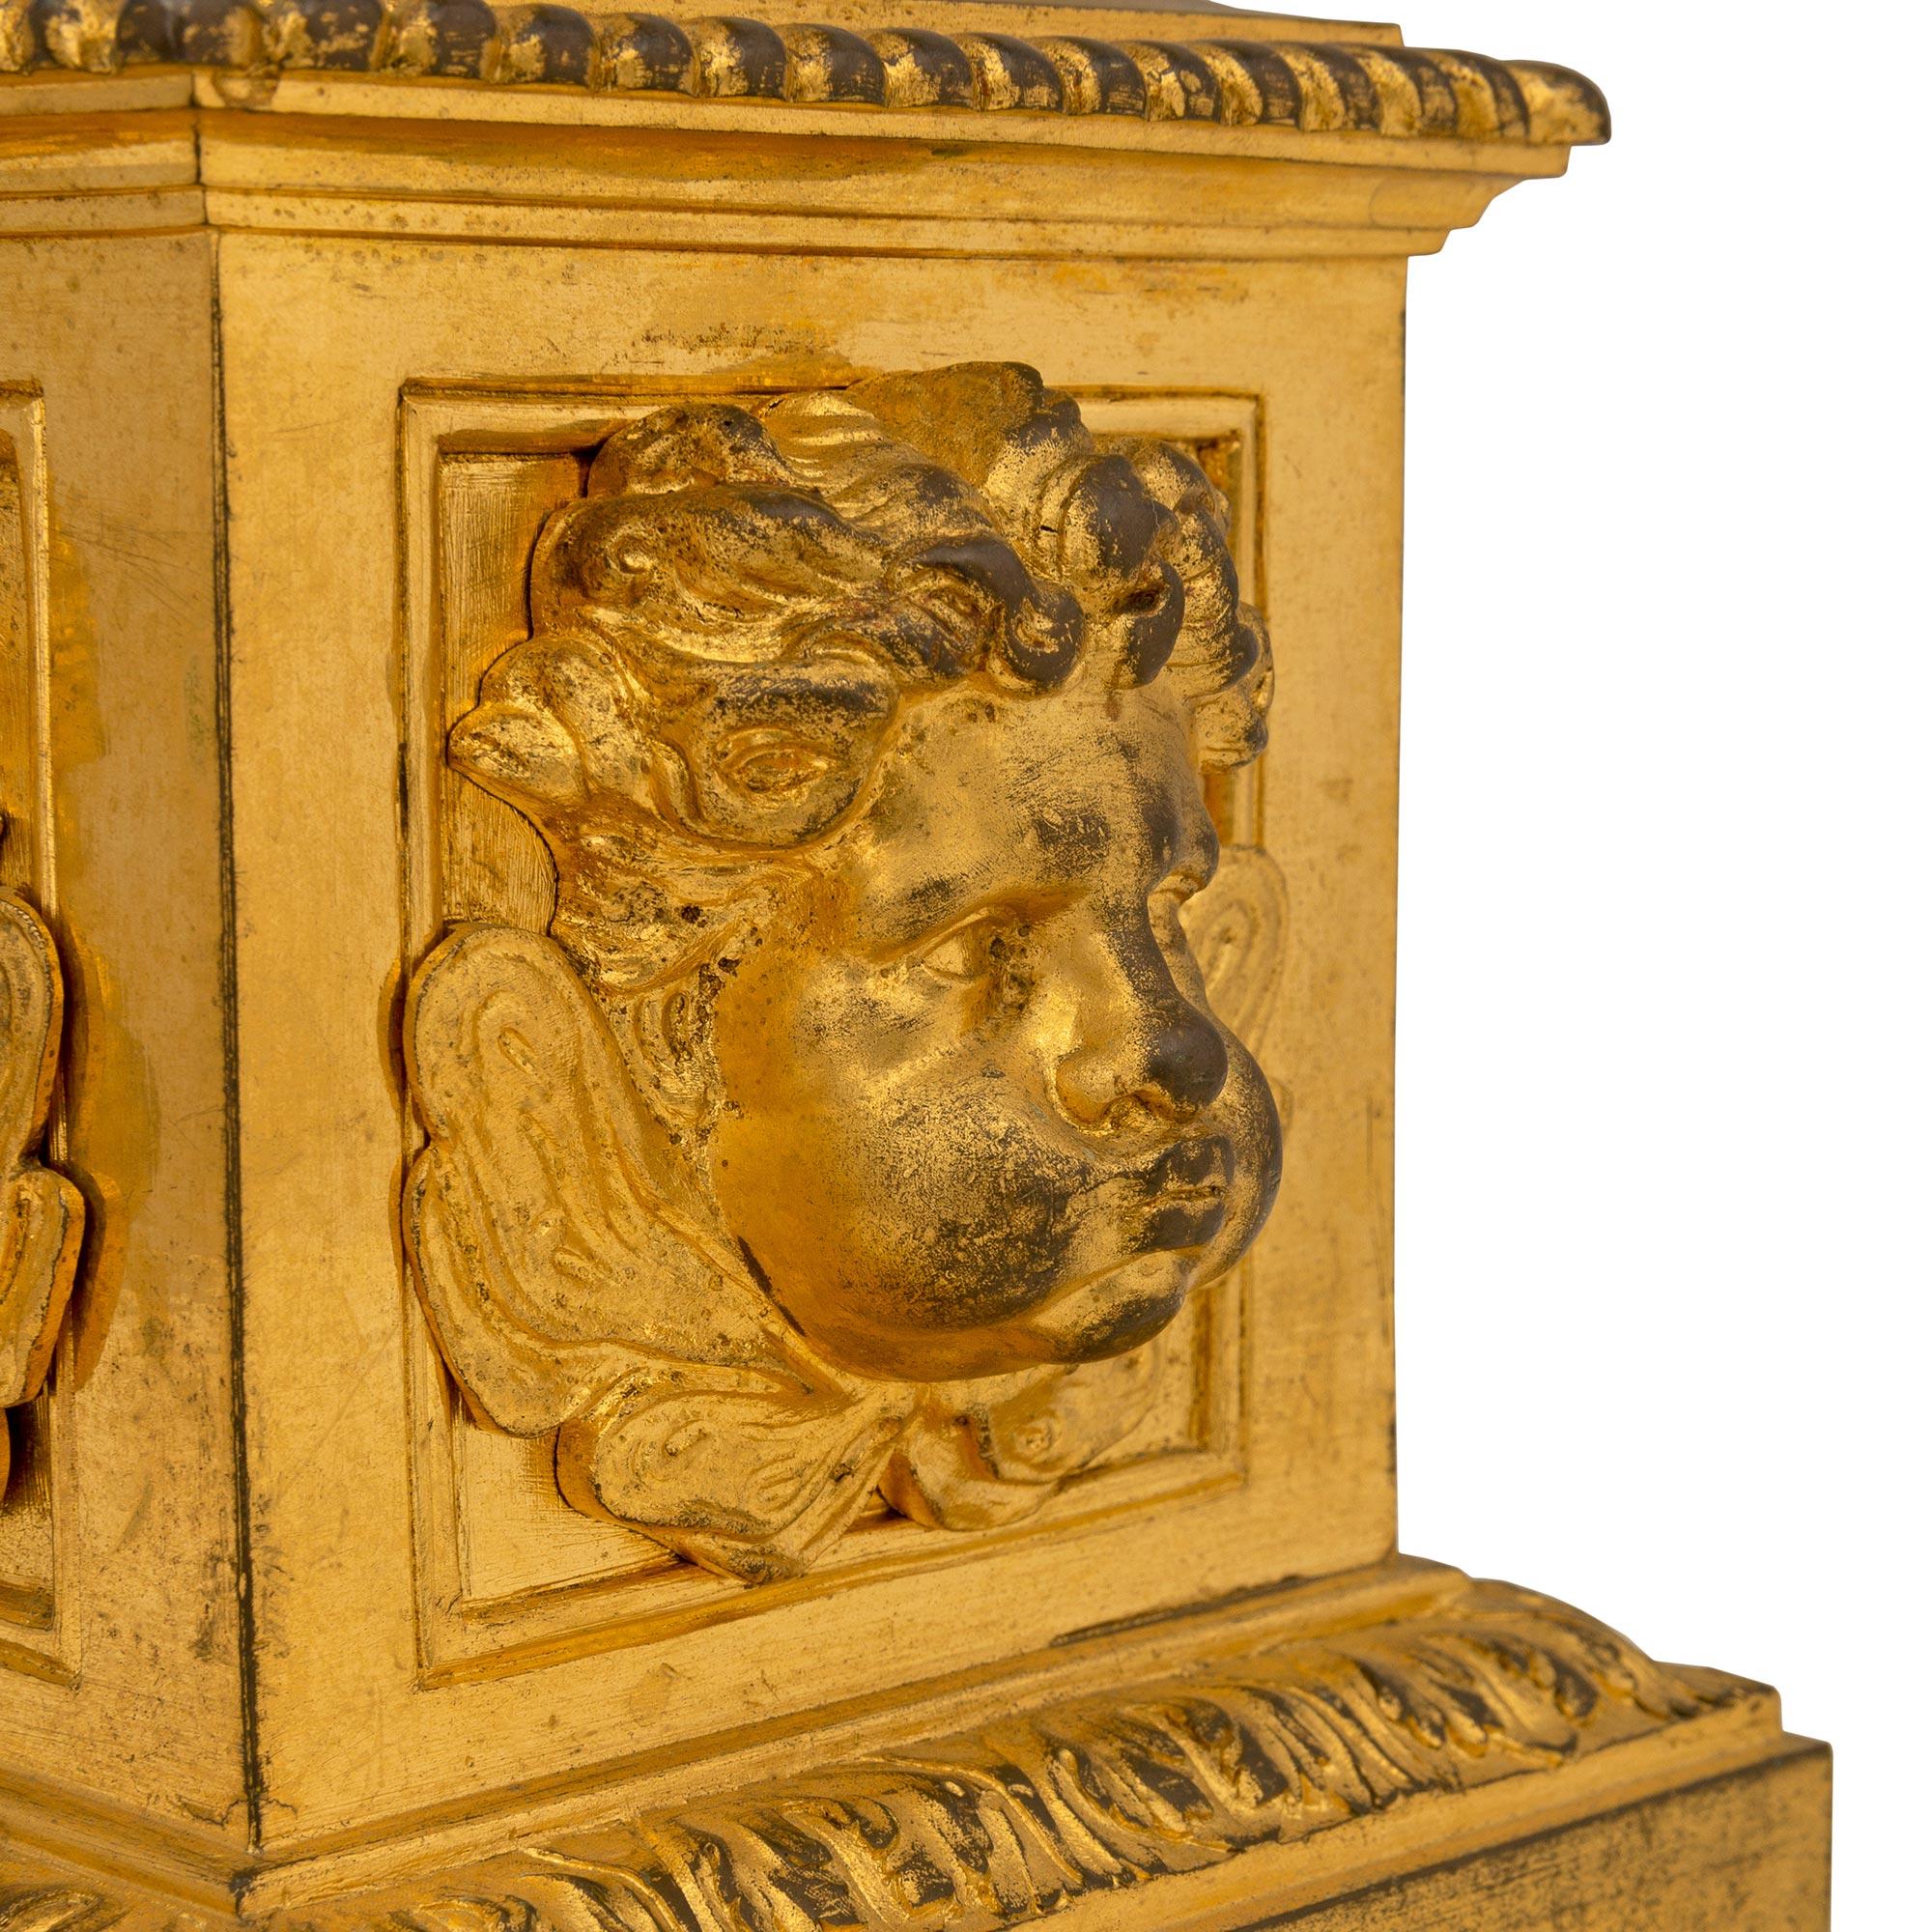 Pair of French 18th Century Louis XVI Period Ormolu Fireplace Chenets/Andirons For Sale 3